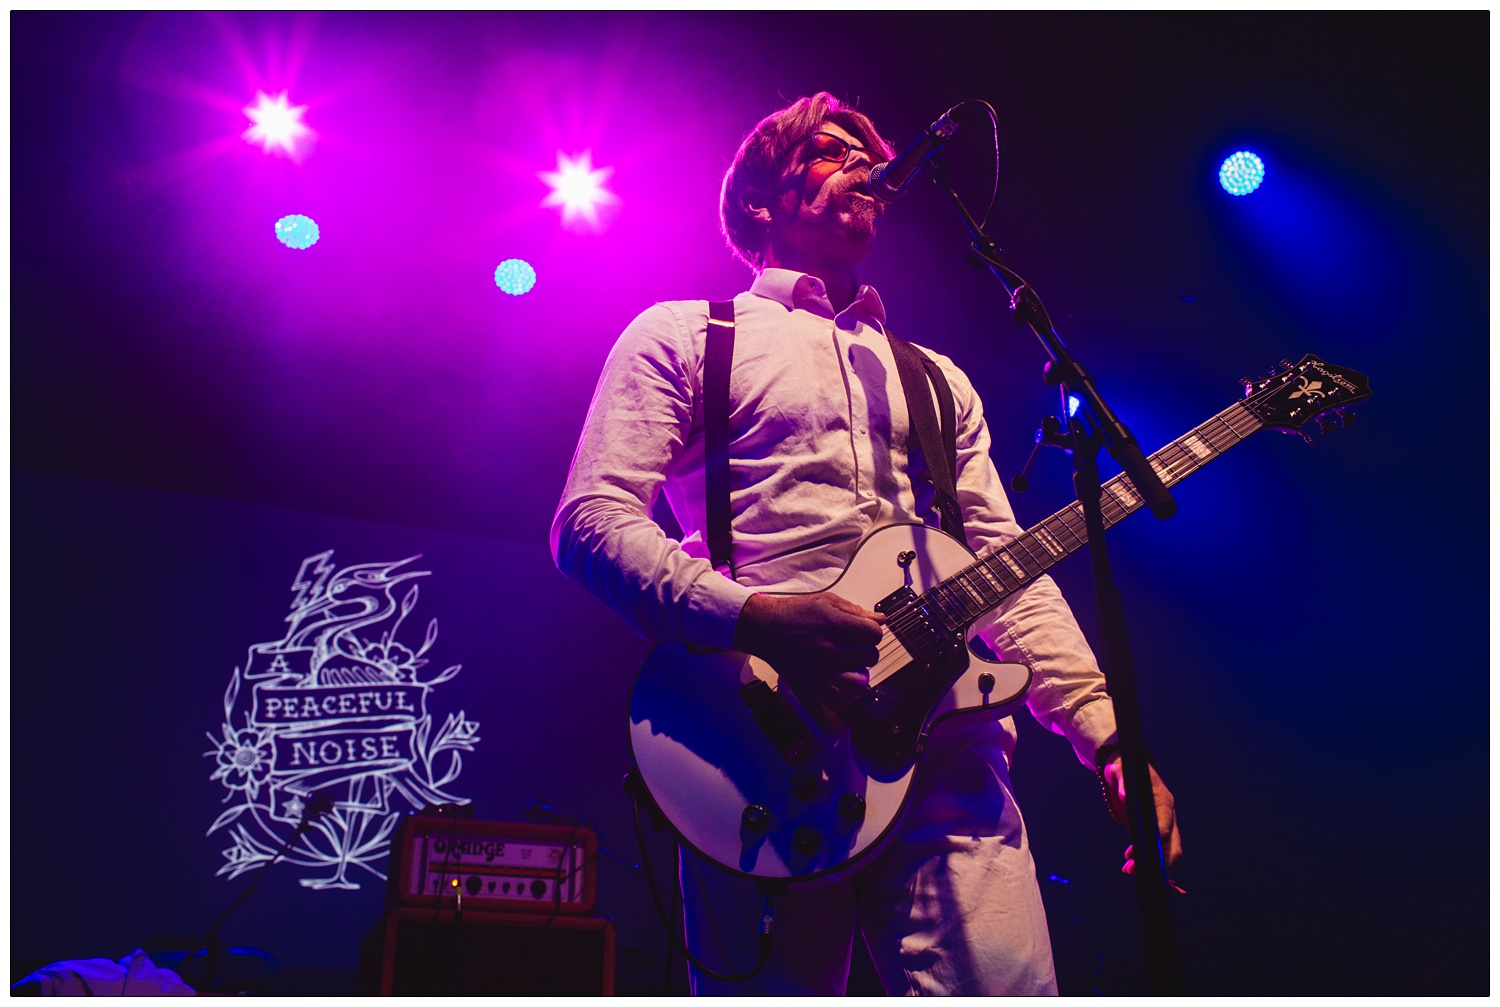 Jesse Hughes of Eagles of Death Metal under purple lights at A Peaceful Noise